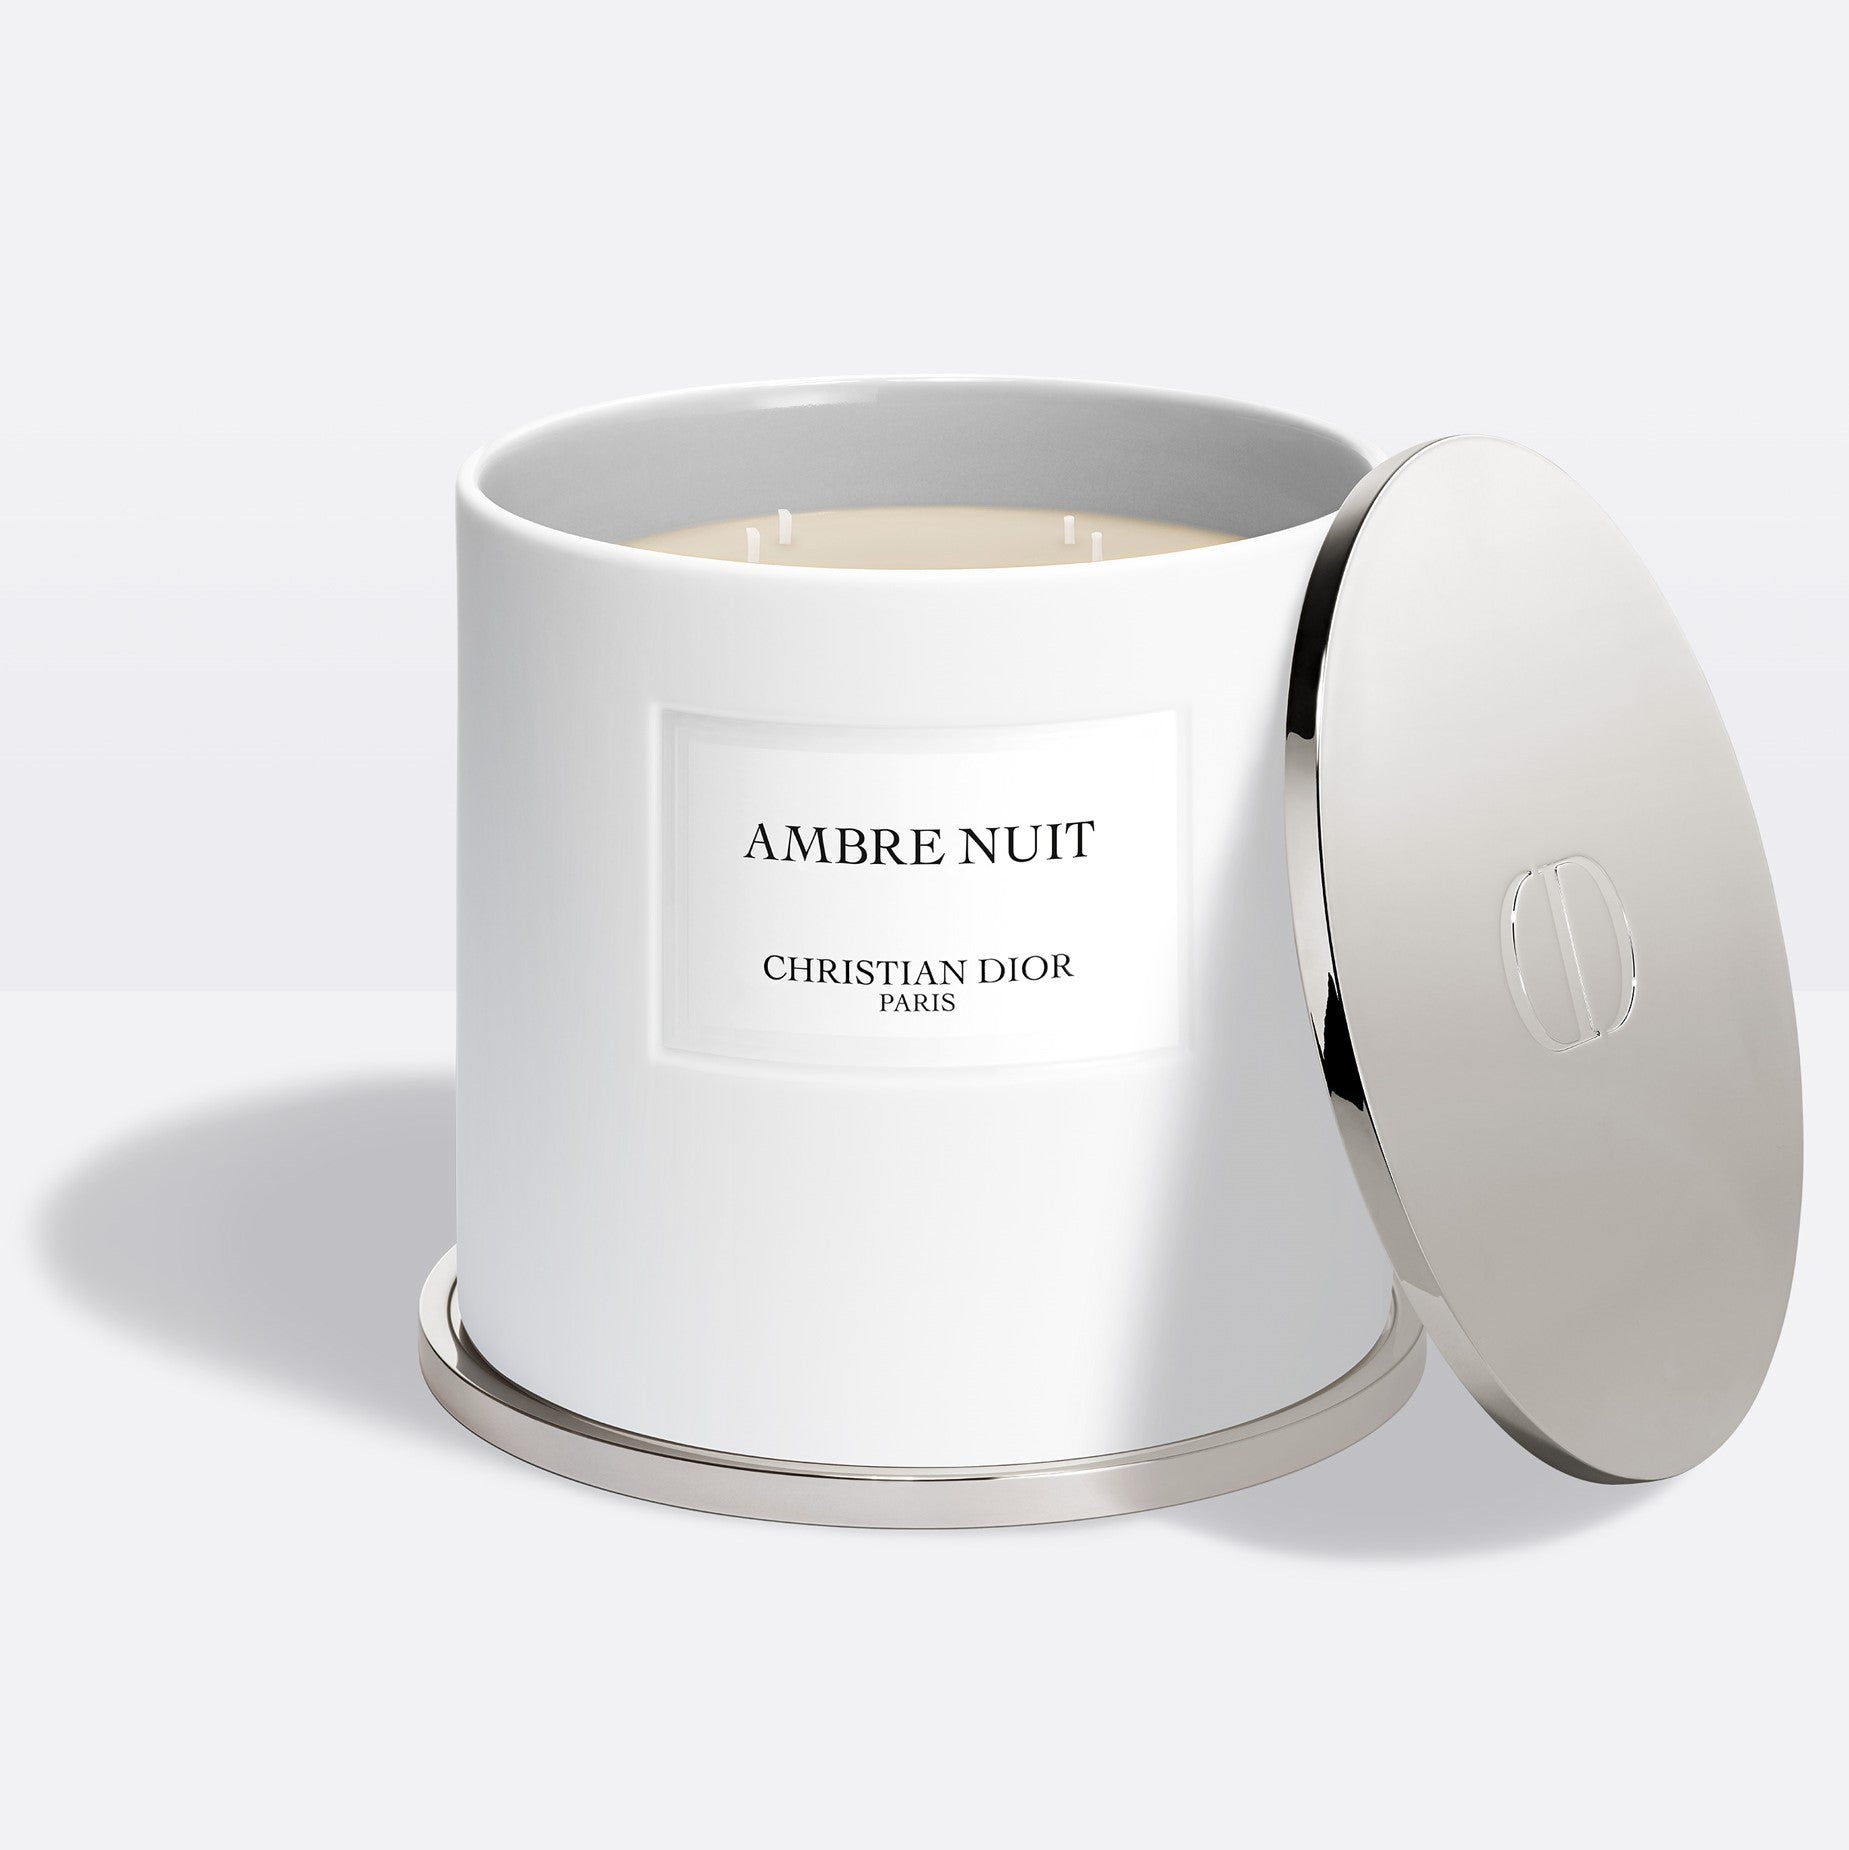 AMBRE NUIT GIANT CANDLE ~ Scented Candle - Amber and Sensual Notes - 1.5 kg